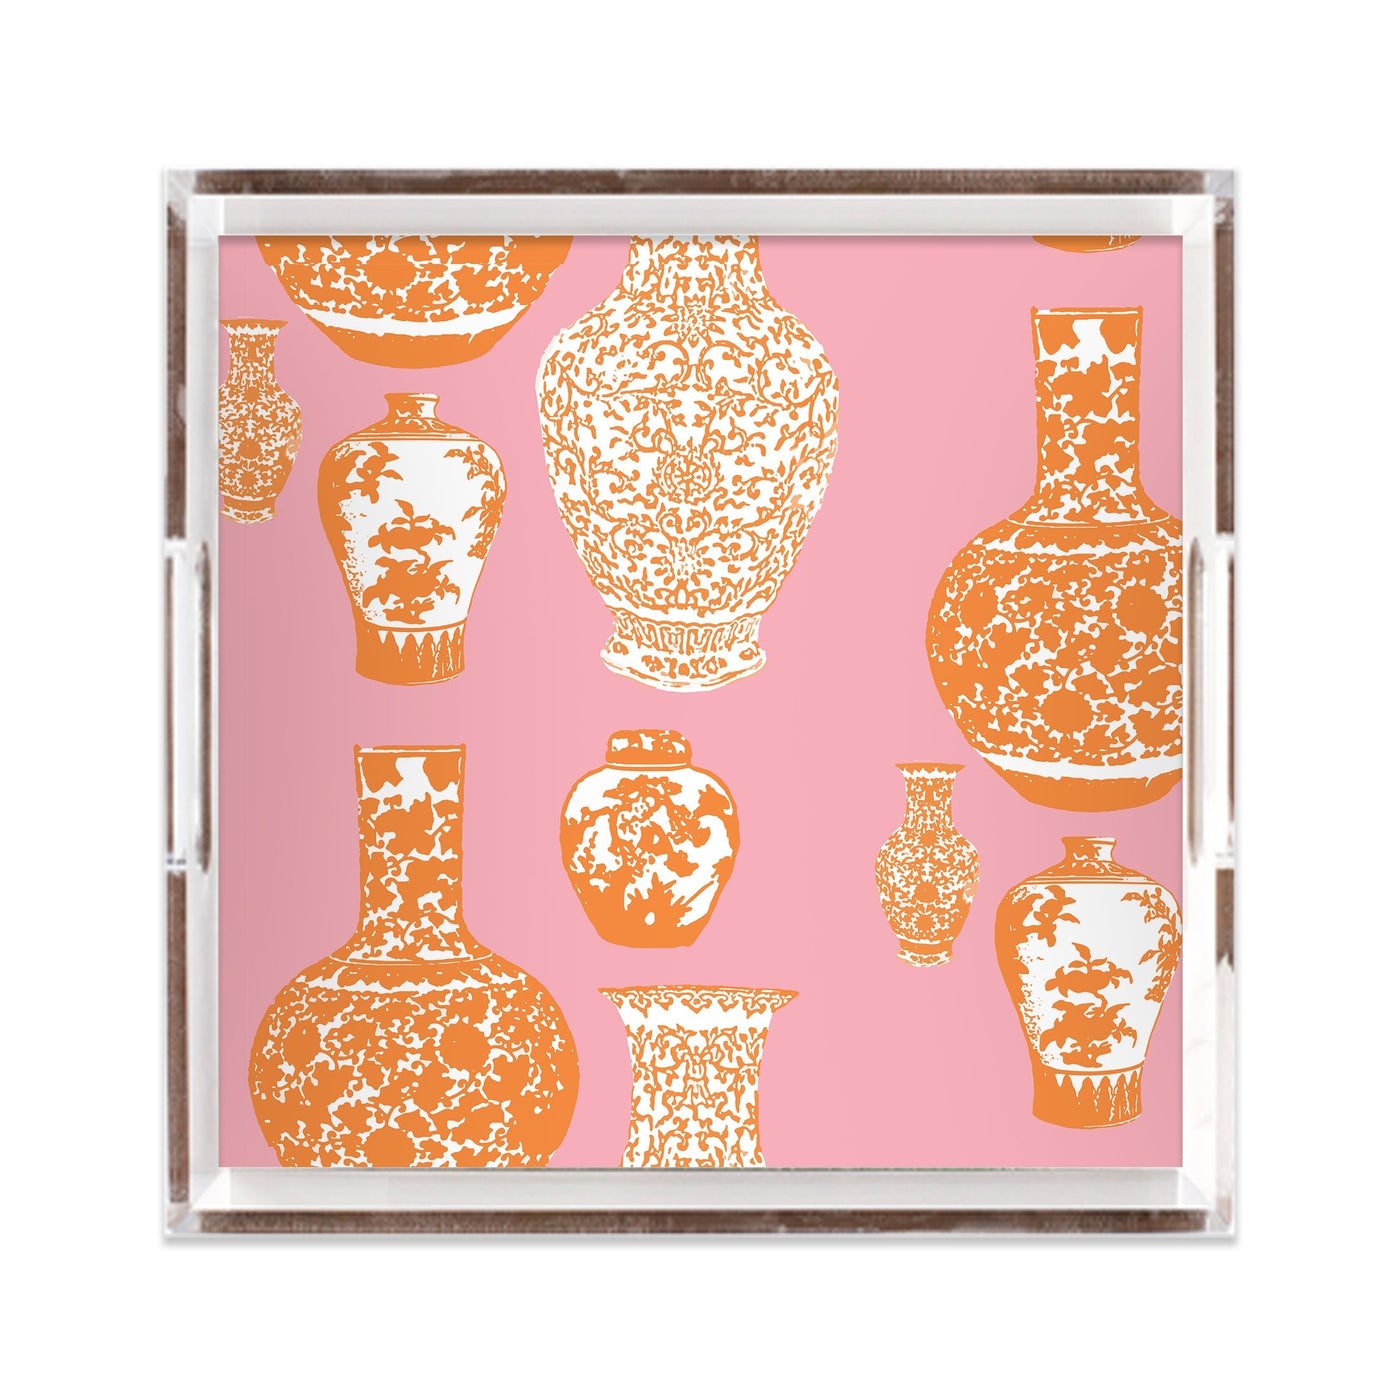 Lucite Trays 12x12 / Pink Orange Ginger Jars Lucite Tray Katie Kime